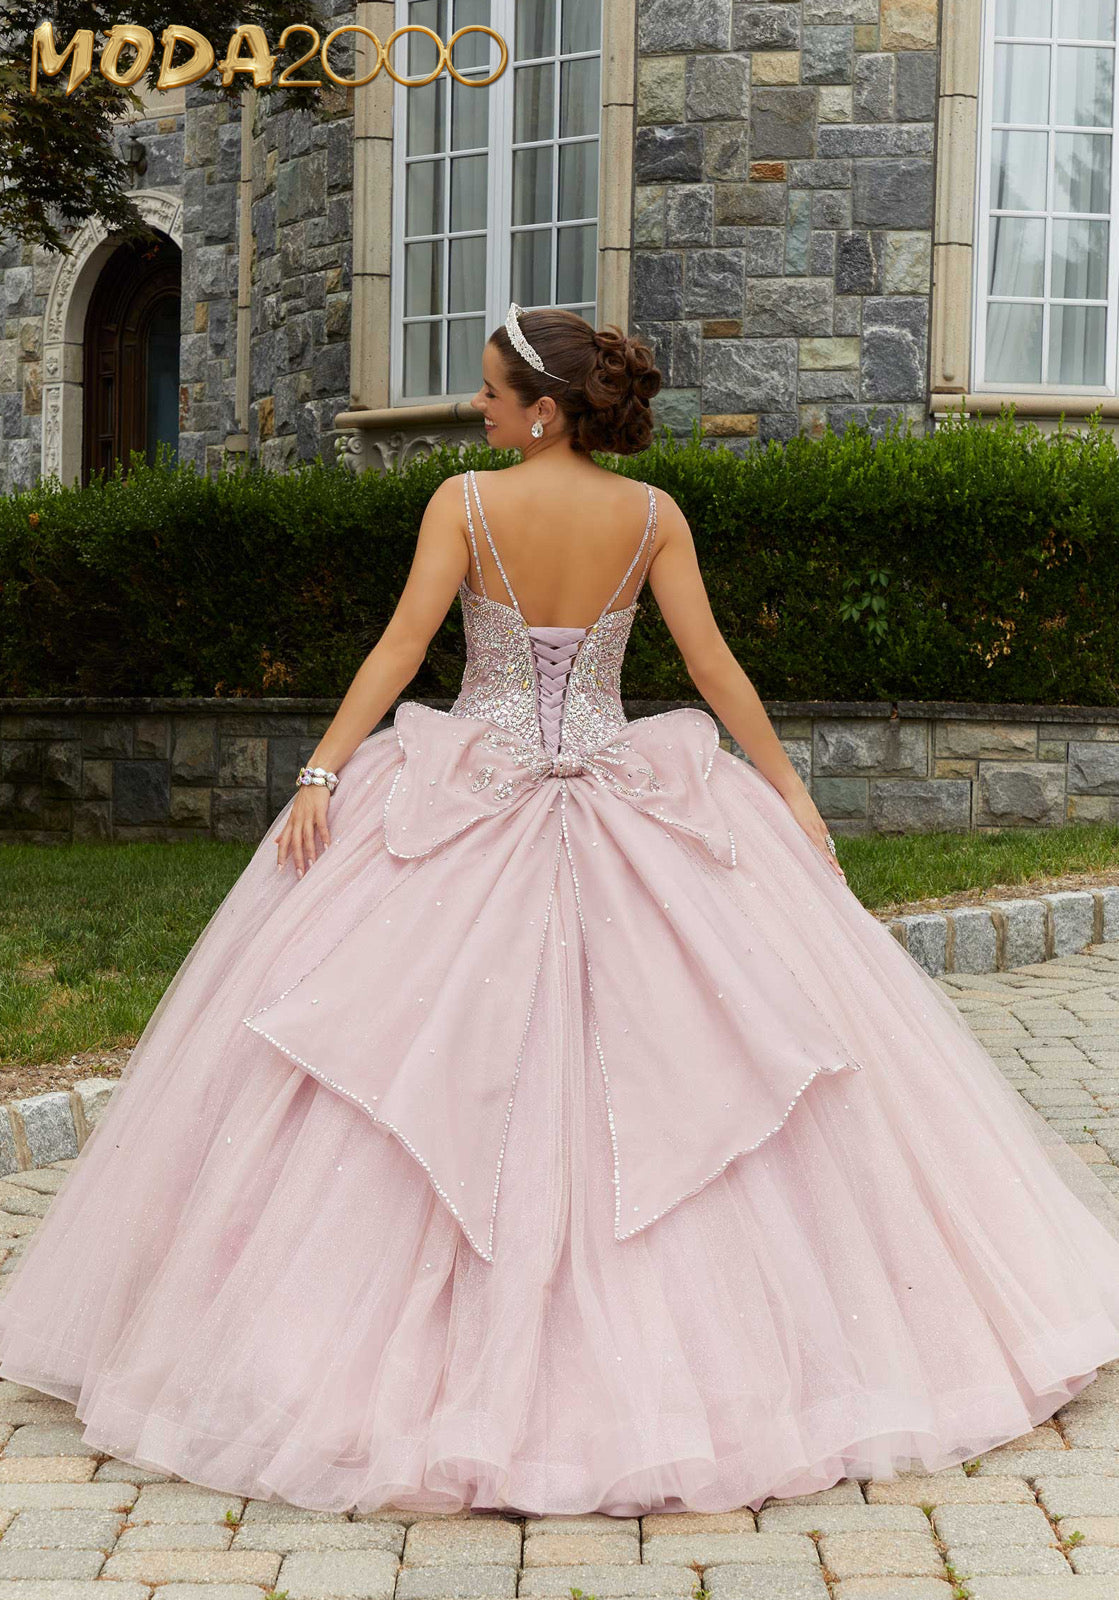 M2K60175 |  Rhinestone and Crystal Beaded Quinceañera Dress with Bow